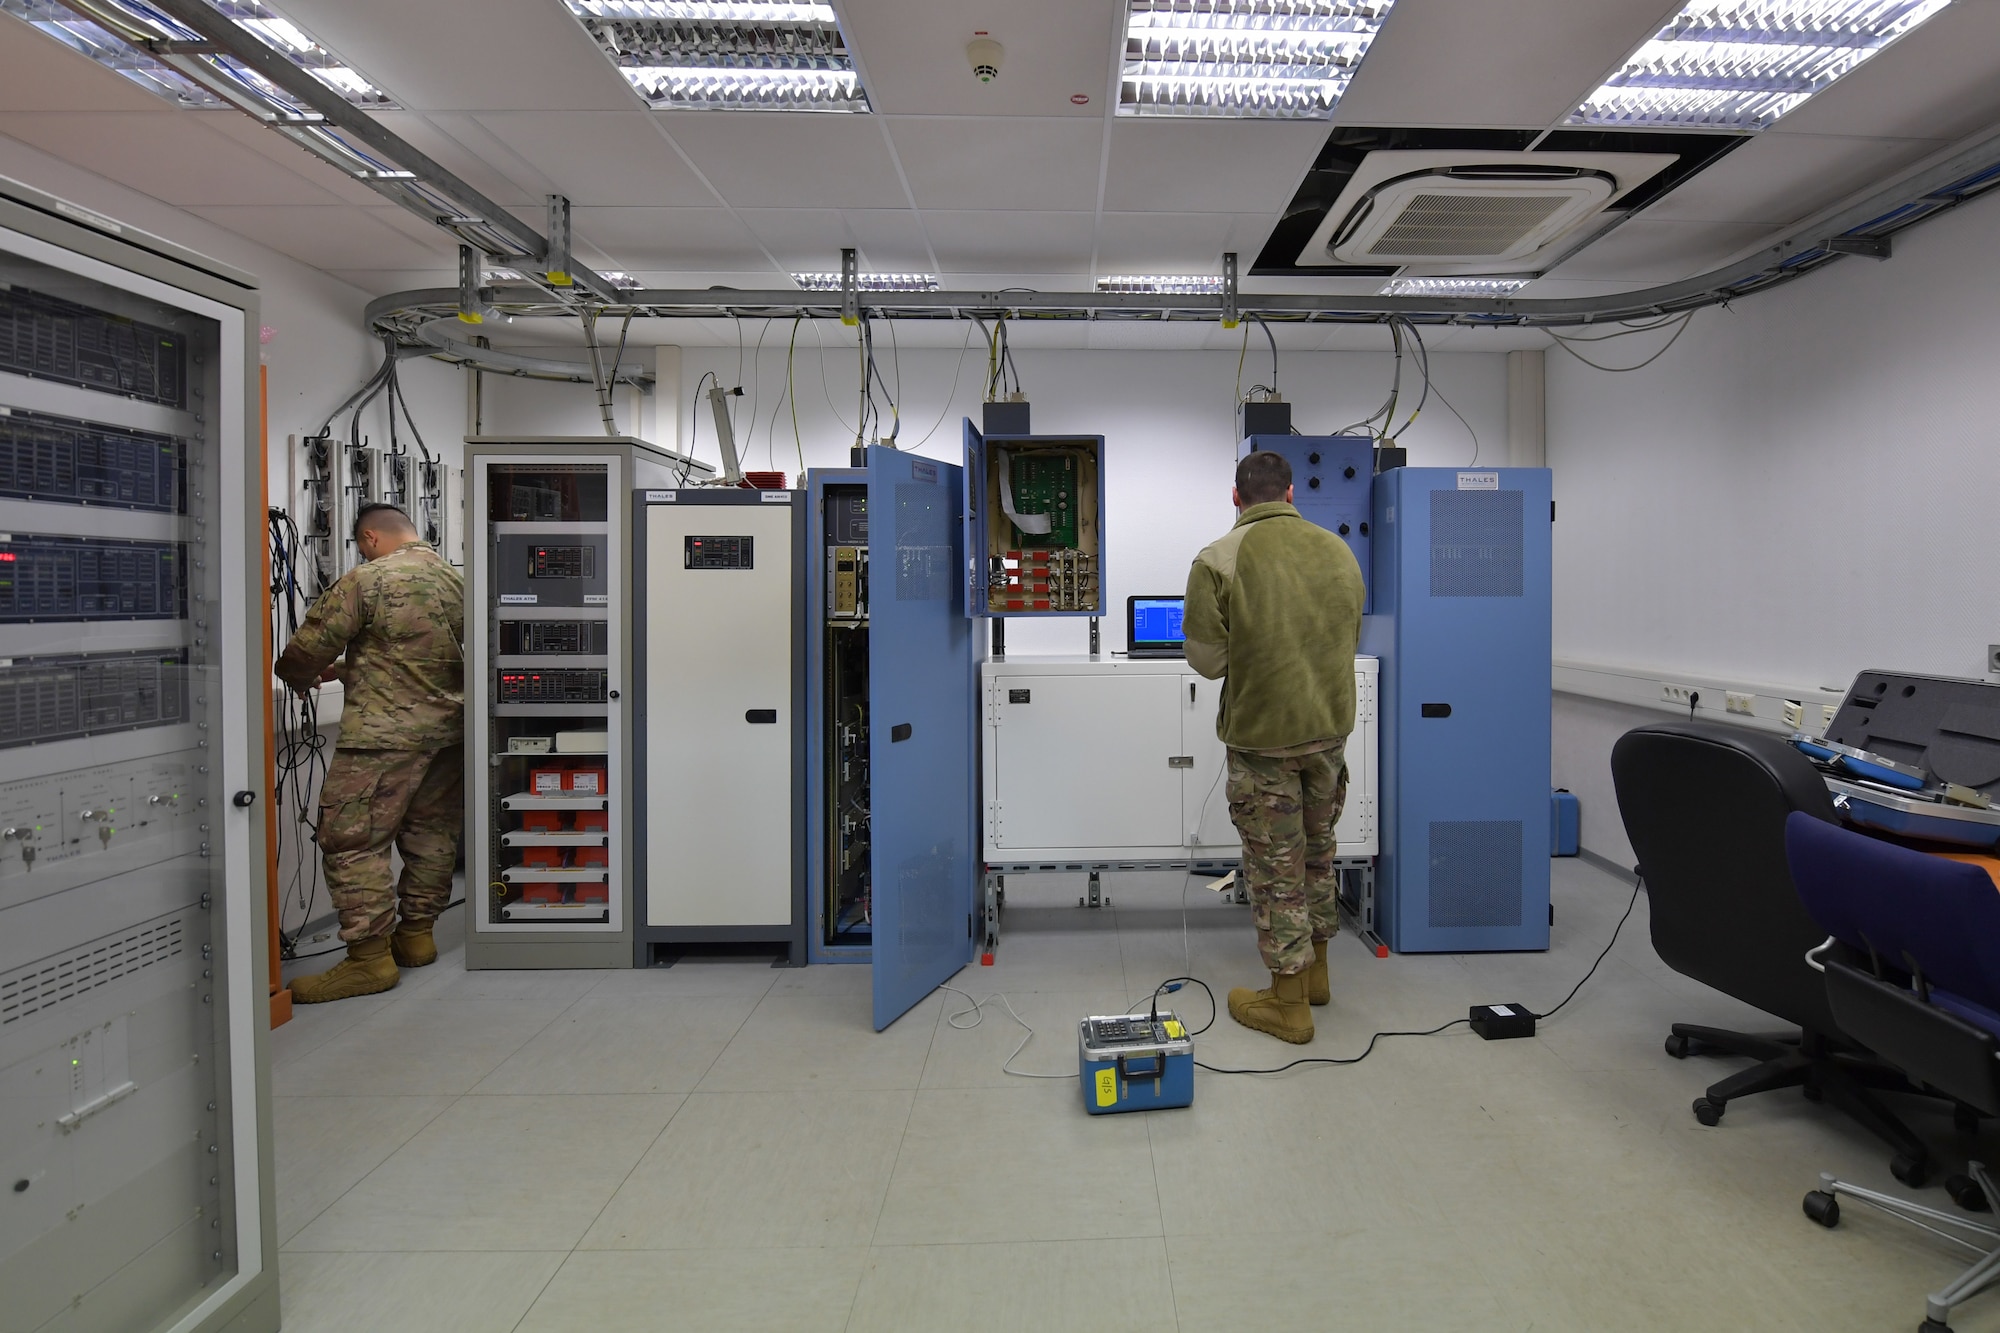 Two Airmen standing in a training room.